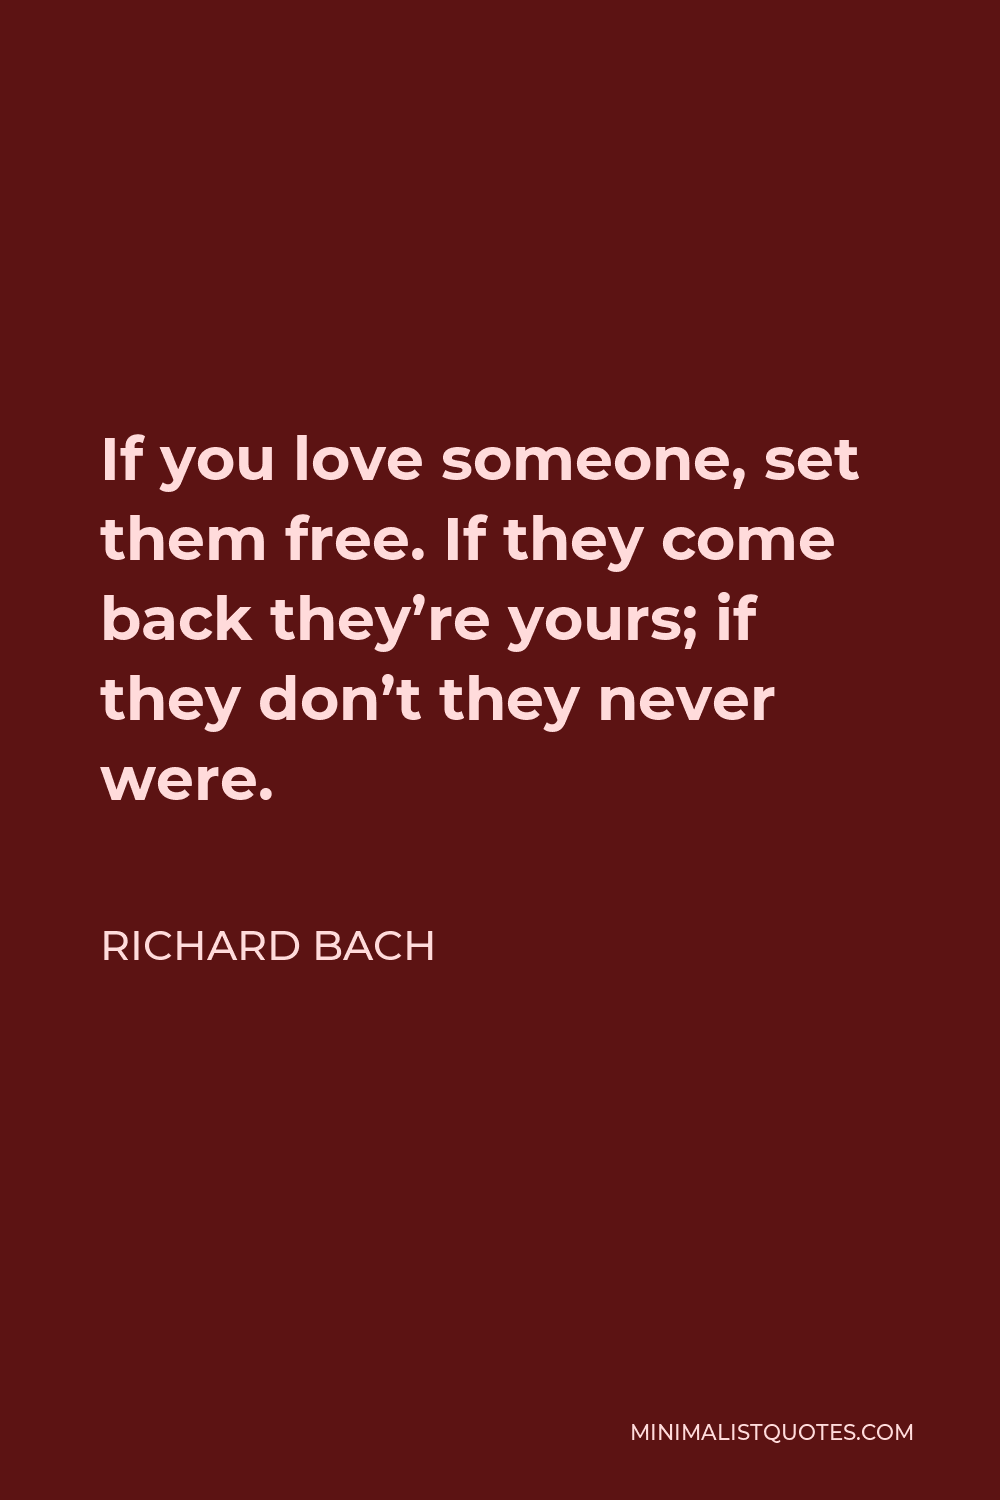 Richard Bach - If you love someone, set them free. If they